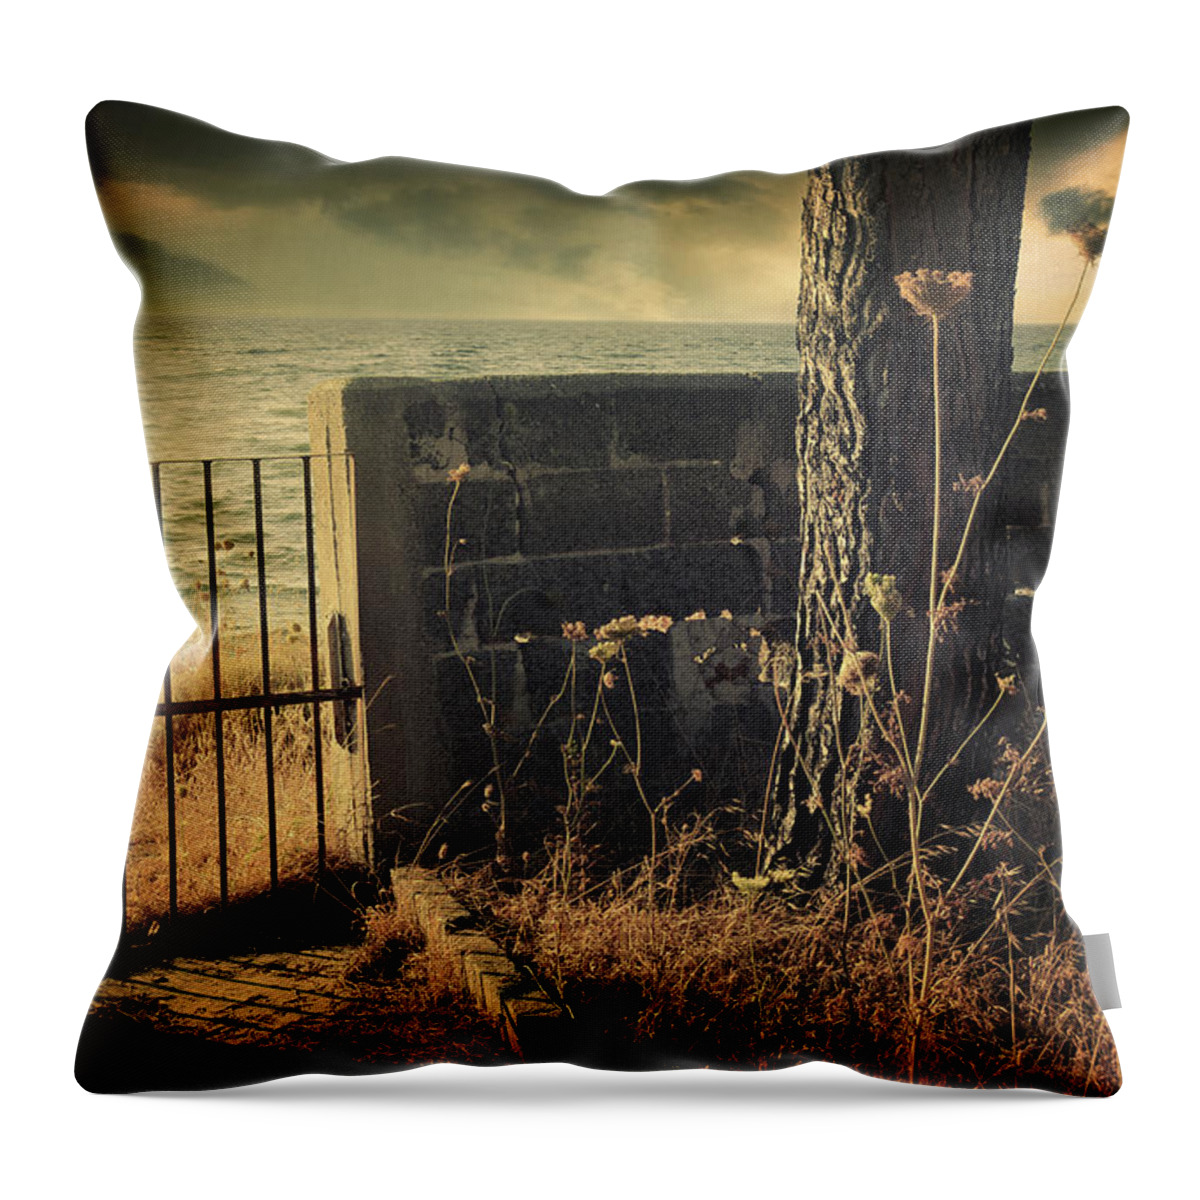 Old Throw Pillow featuring the photograph Leaving Home by Craphe Studio